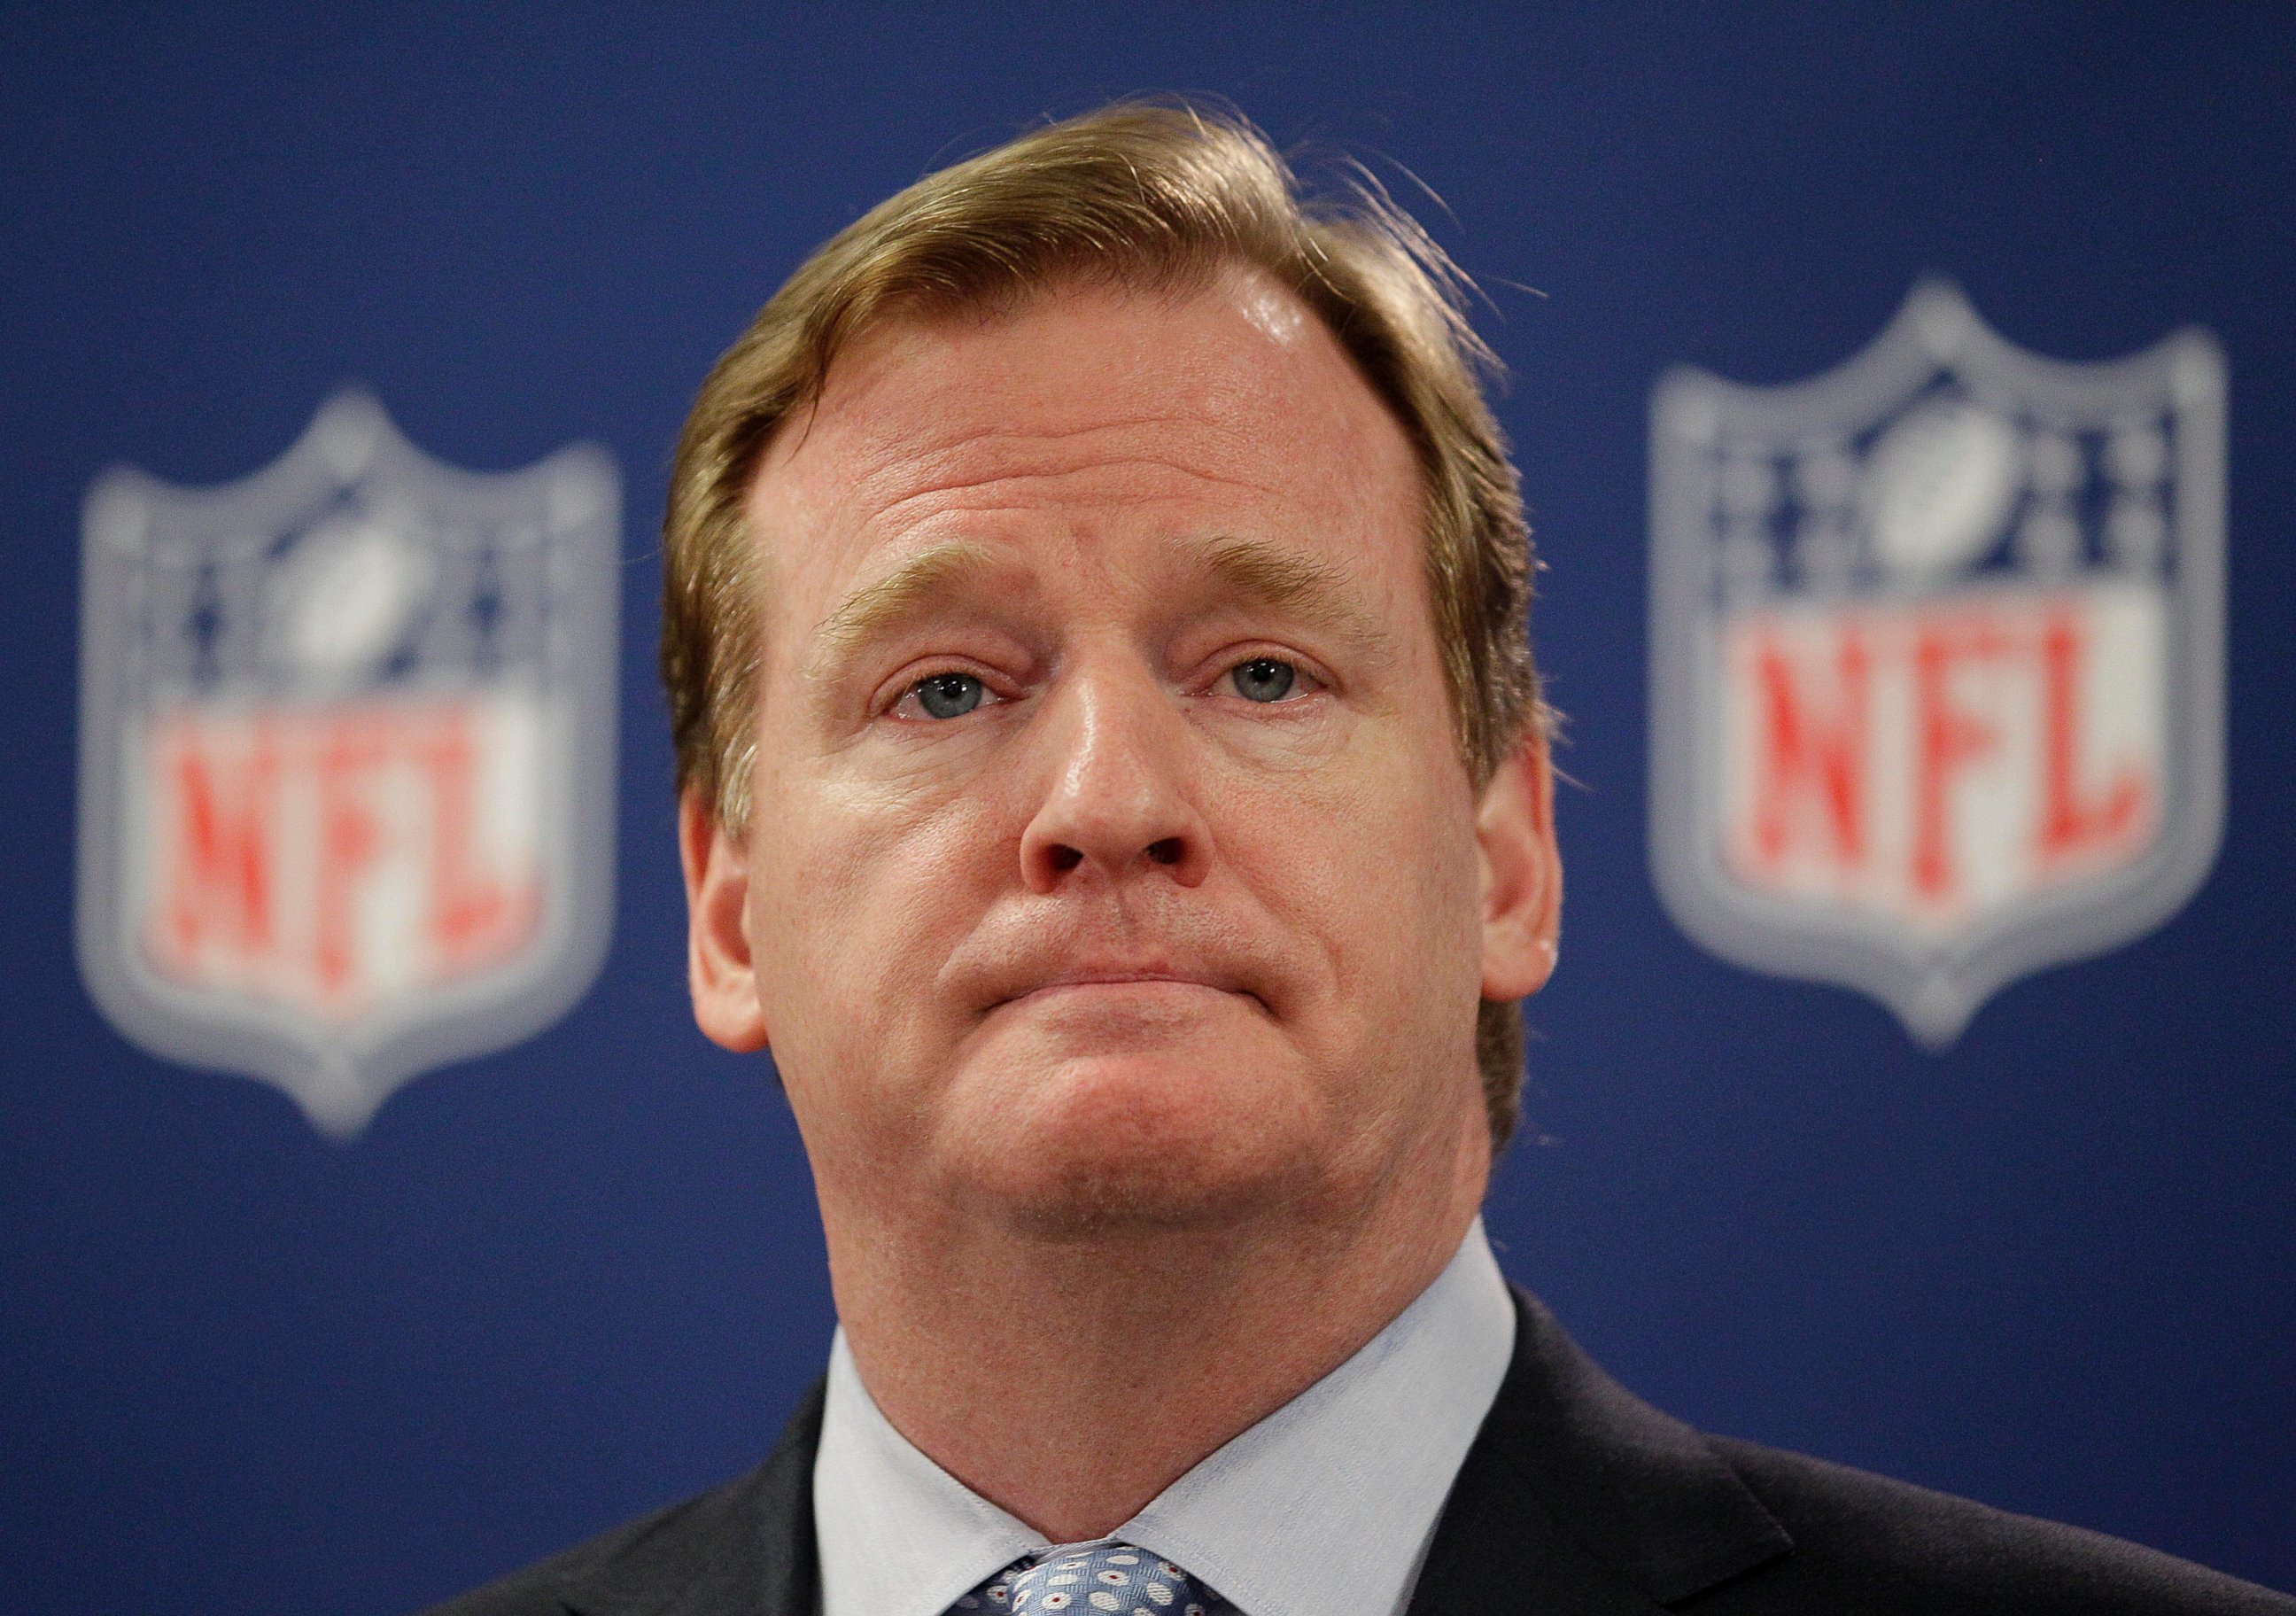 PHOTO: NFL Commissioner Roger Goodell pauses during a new conference in Atlanta on May 22, 2012.